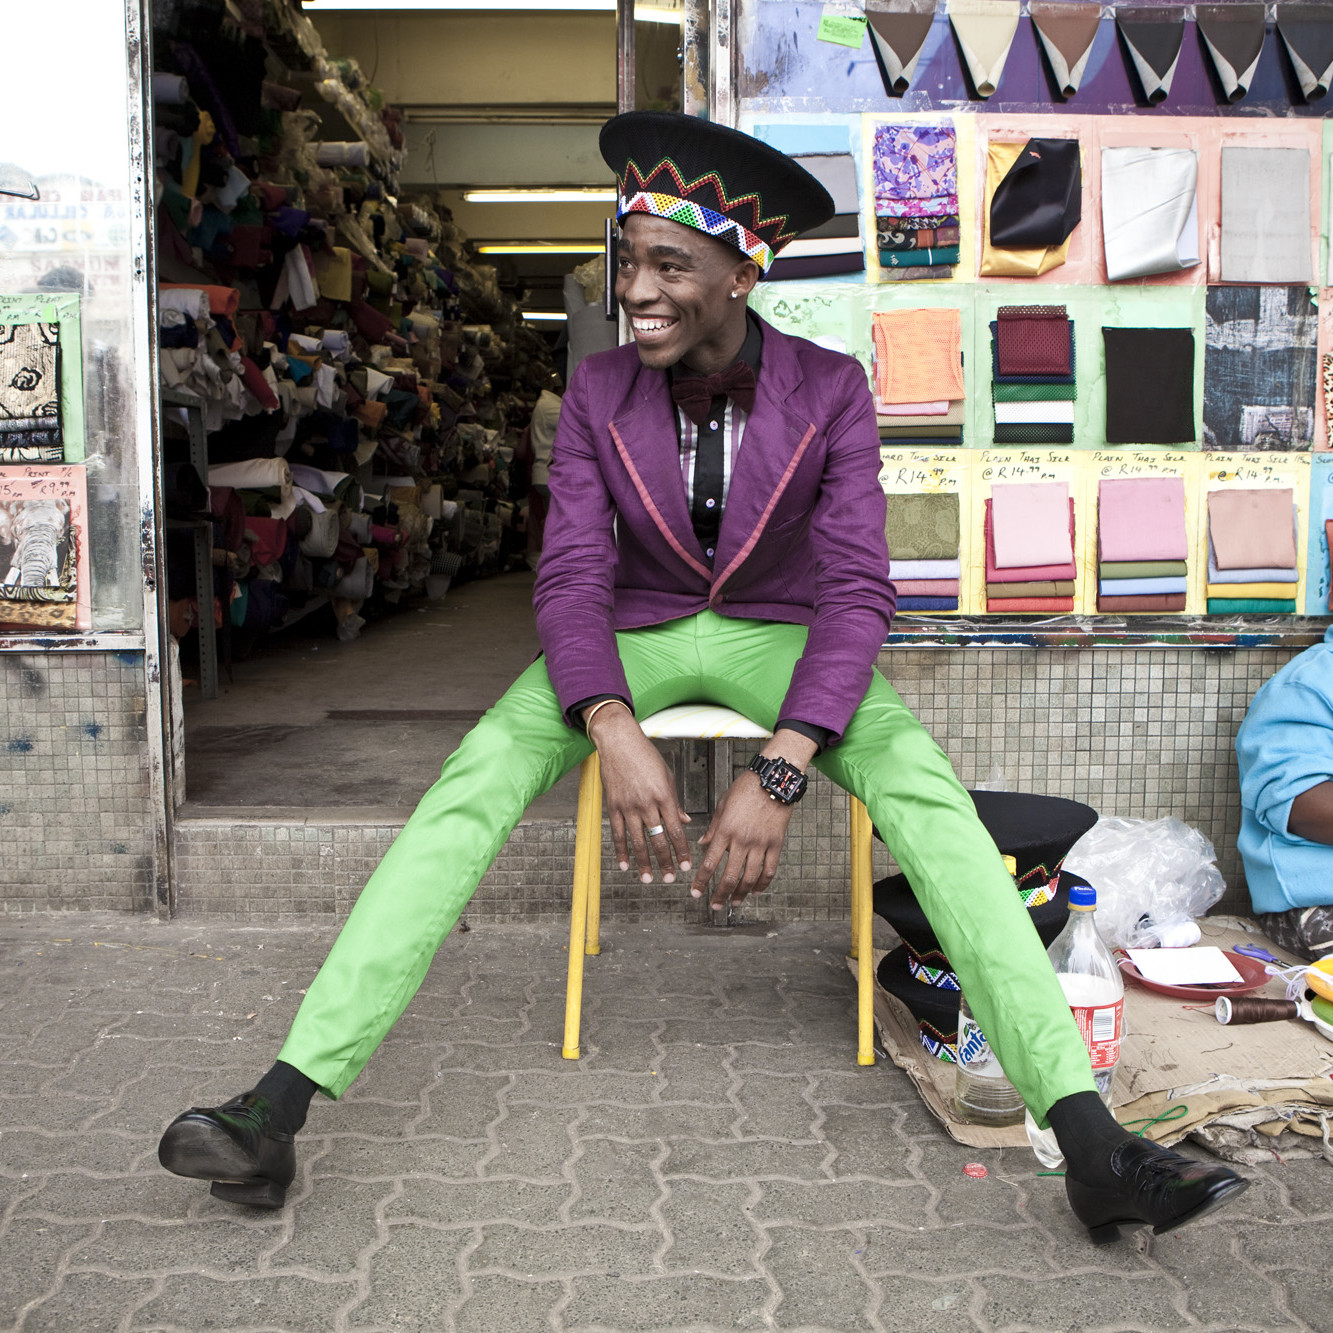 Smiling man wearing a purple blazer, green pants, and black hat sits on a chair in front of a fabric store and a smiling woman in a light blue hoodie